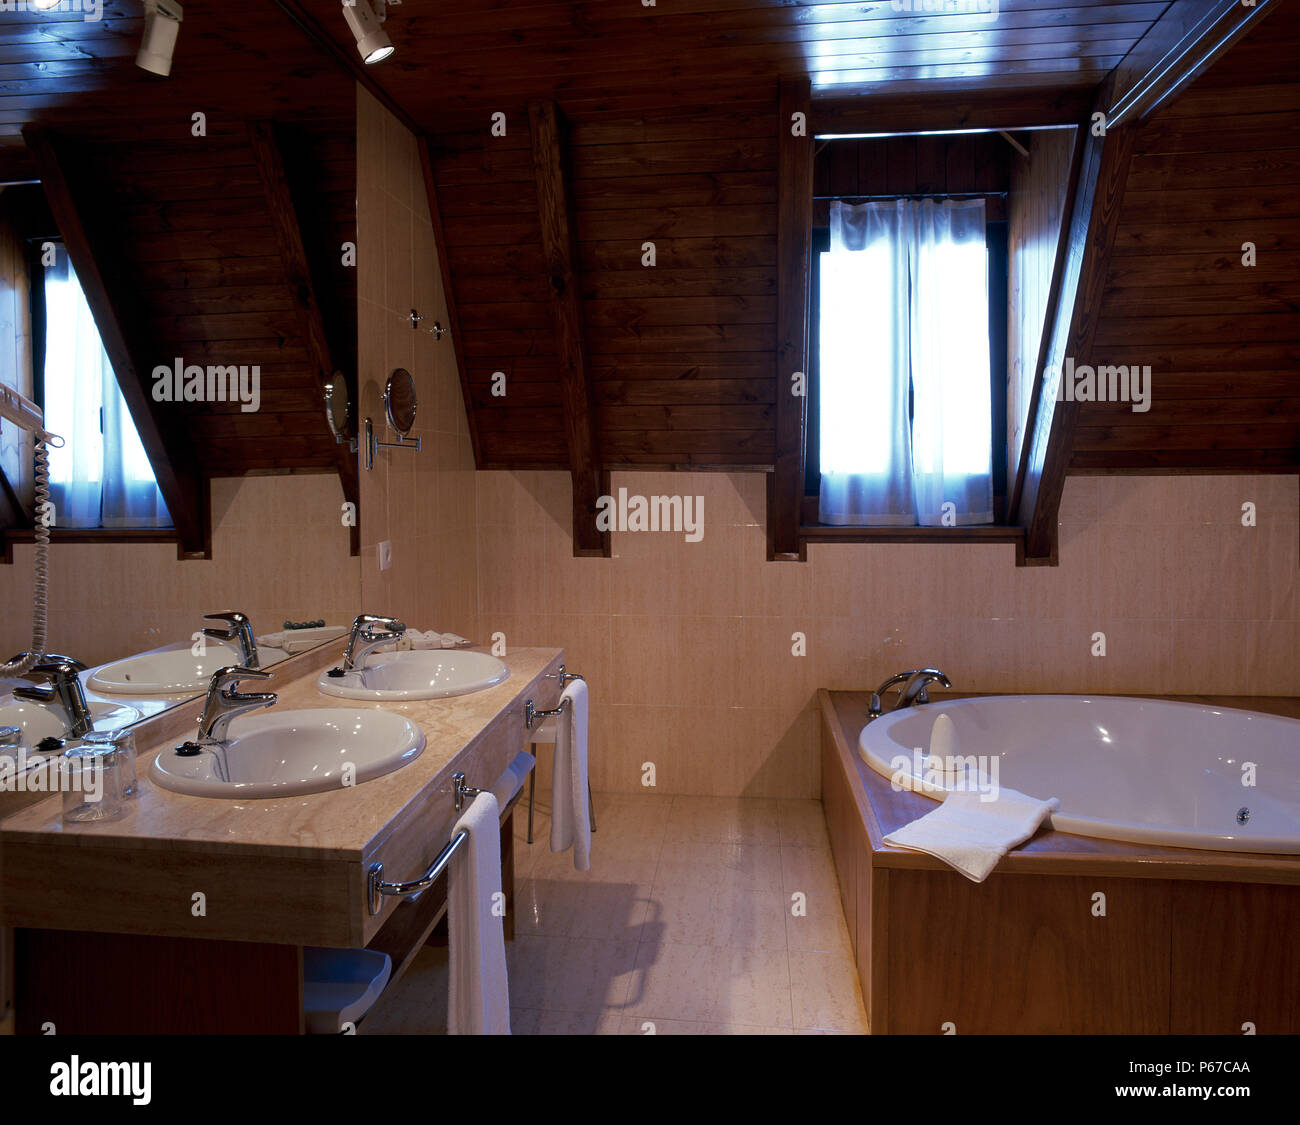 View of a well maintained bathroom Stock Photo